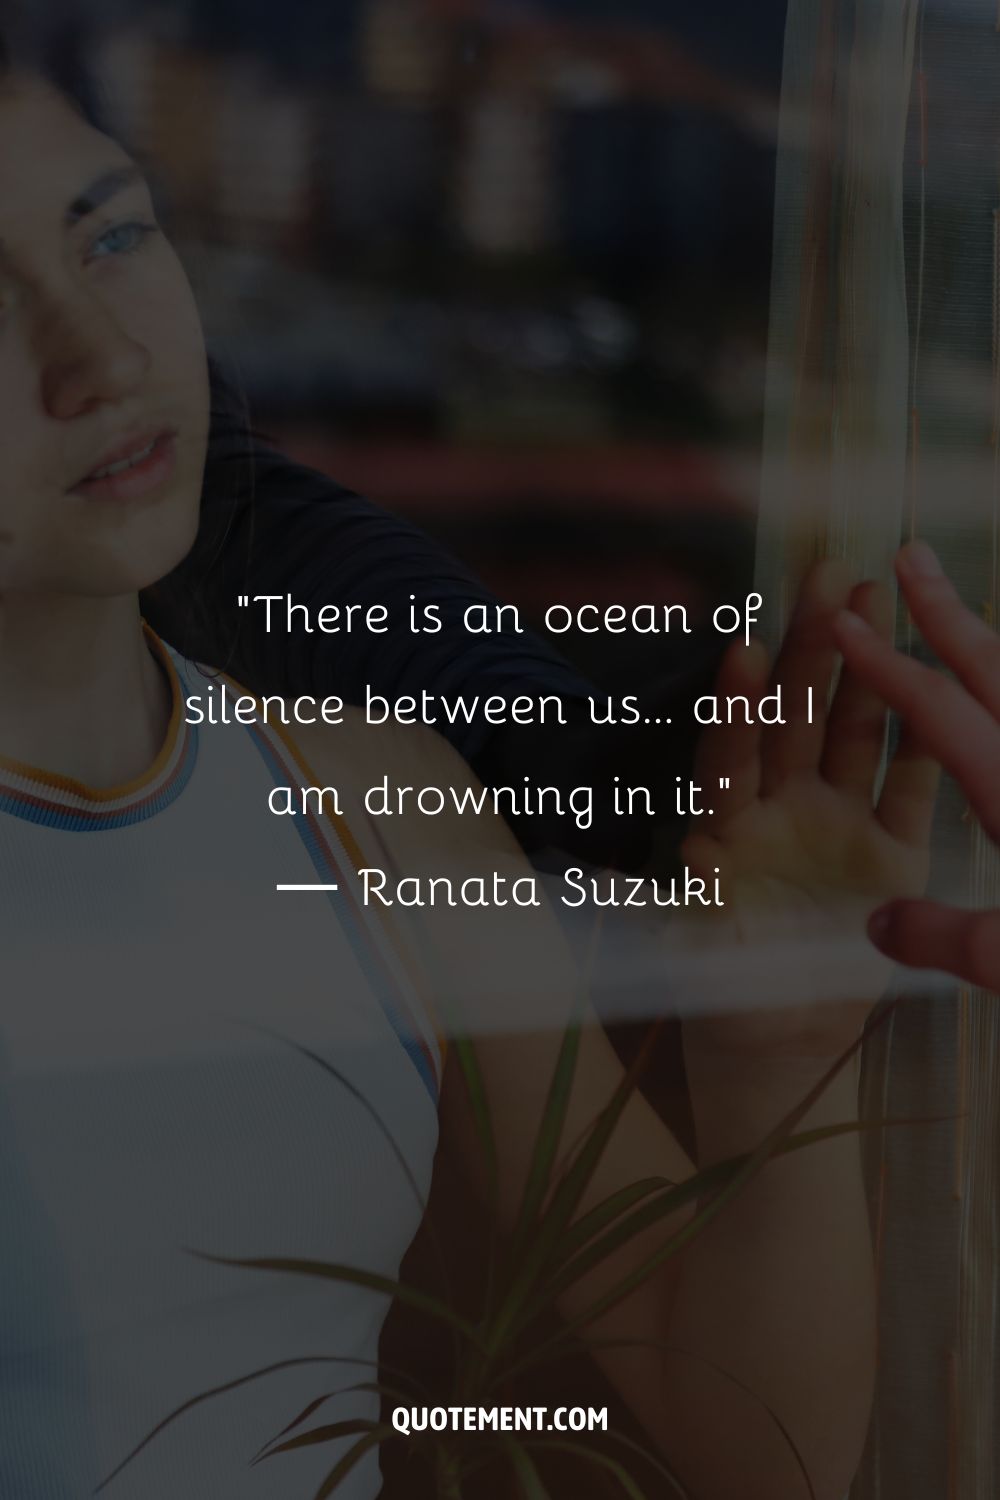 There is an ocean of silence between us… and I am drowning in it.